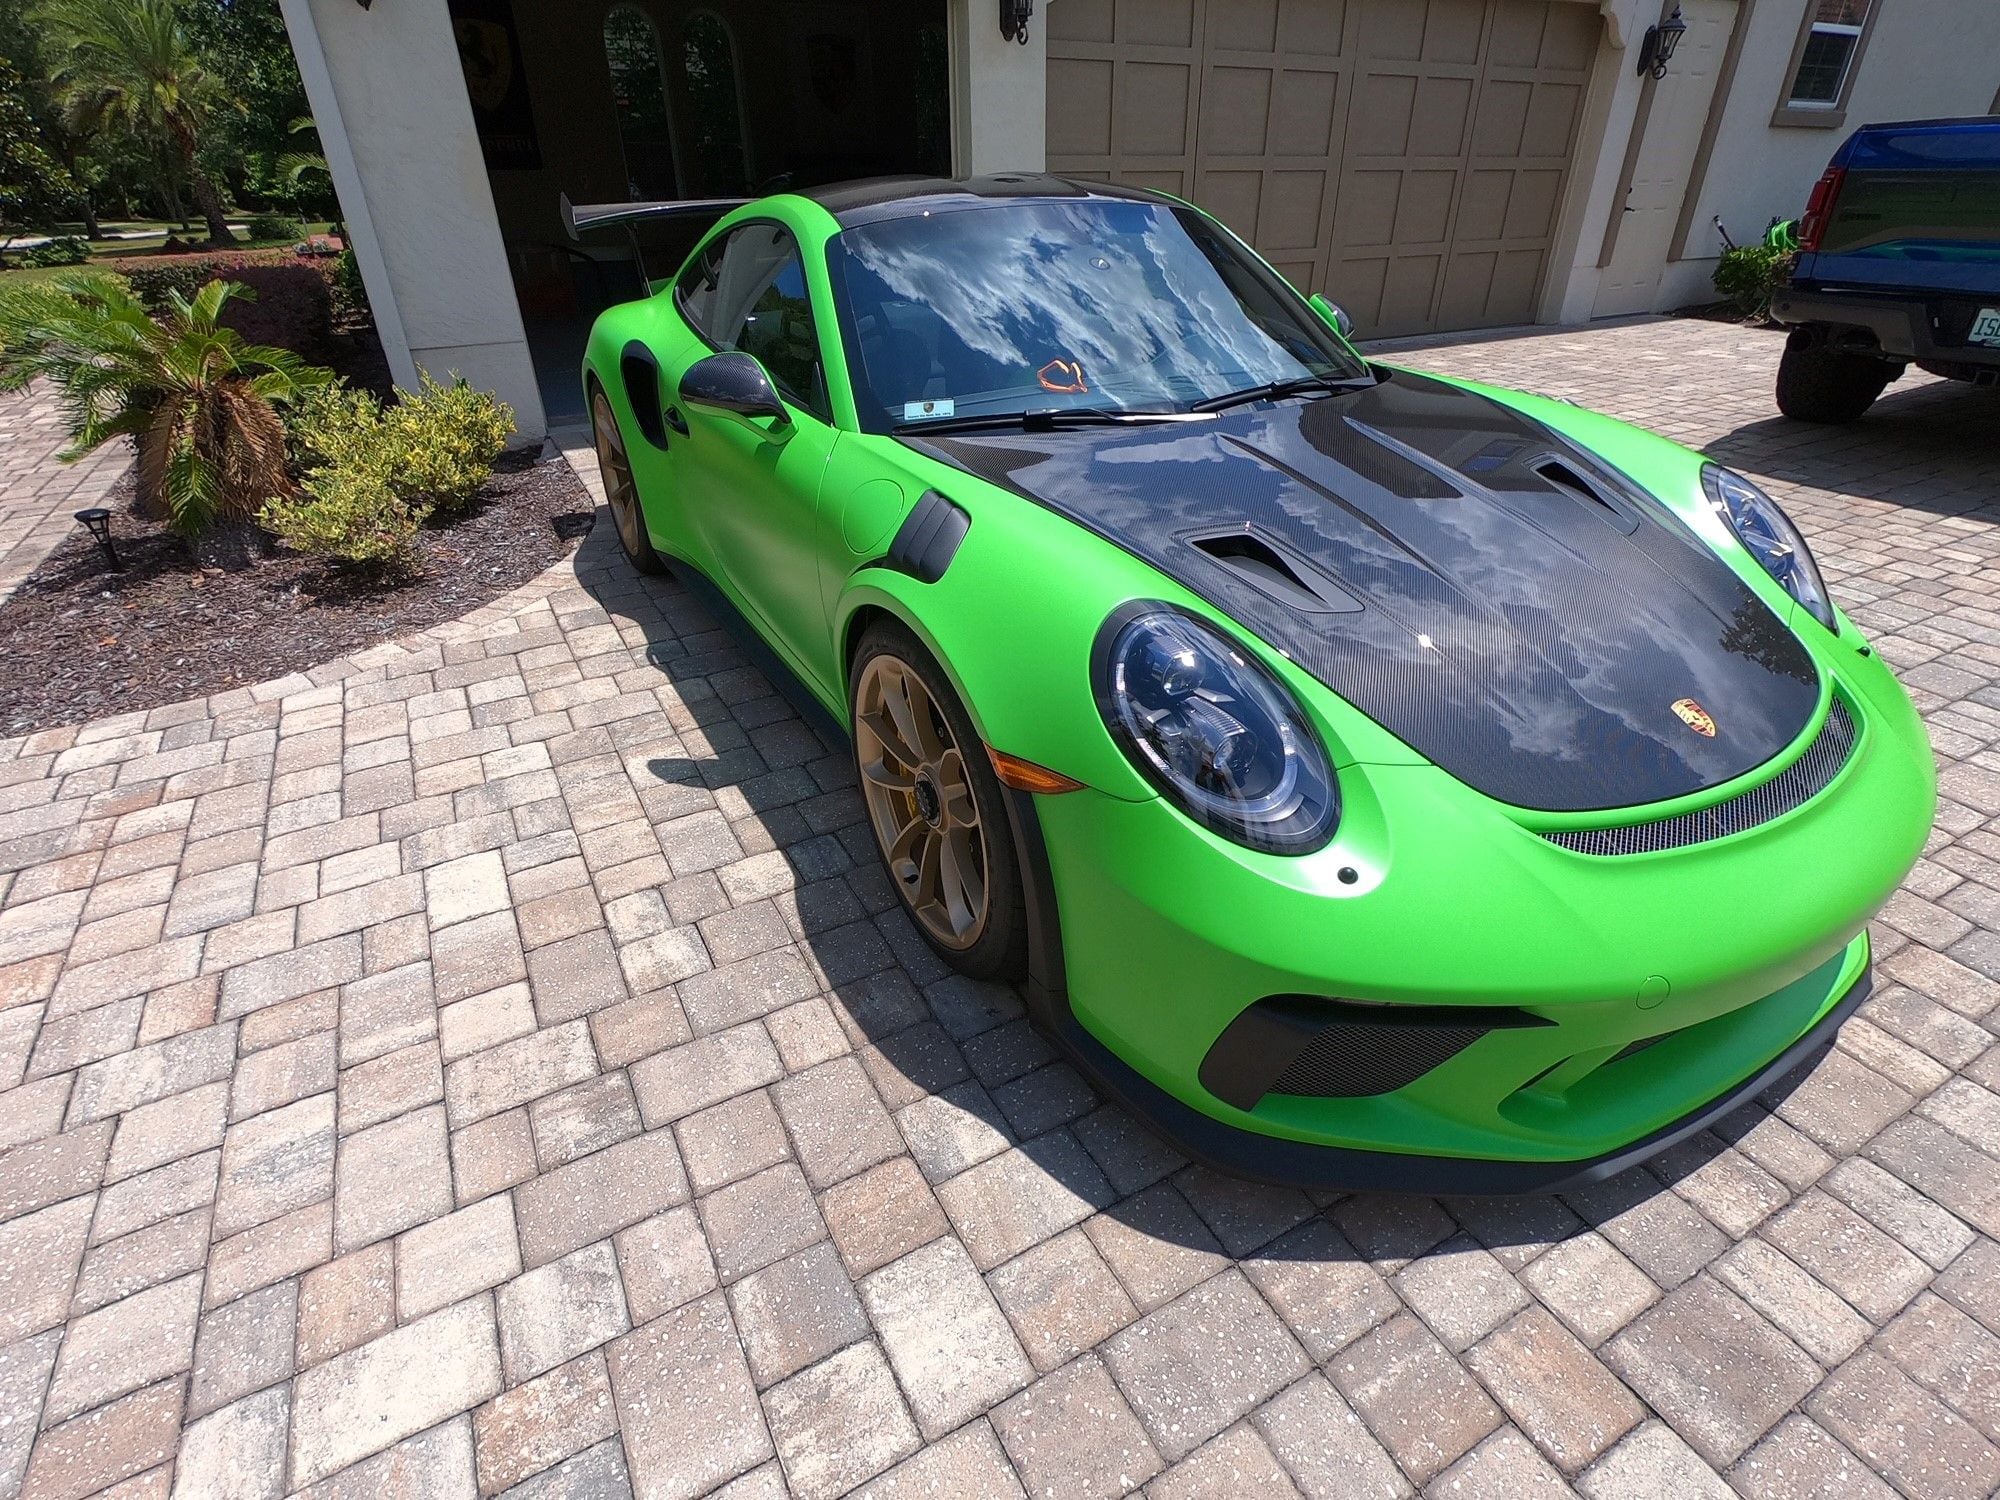 2019 Porsche GT3 - 2019 GT3 RS-Weissach,PCCB,Nose Lift--Priced $15k Under MSRP - Used - VIN WP0AF2A96KS164999 - 2,789 Miles - 6 cyl - 2WD - Automatic - Coupe - Other - Ponte Vedra Beach, FL 32082, United States